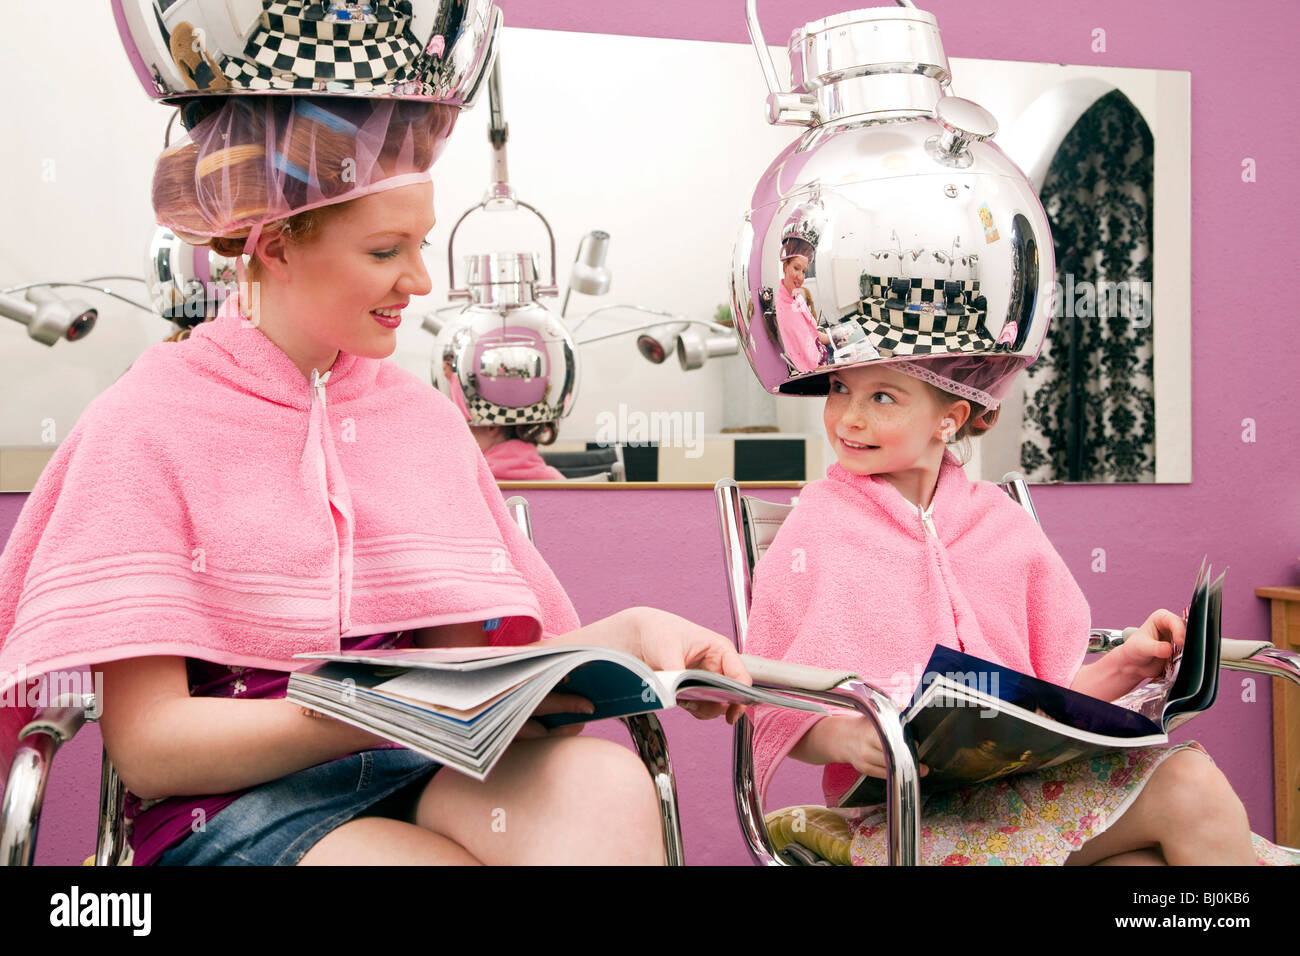 young woman and little girl sitting under hair dryers at hair salon Stock Photo